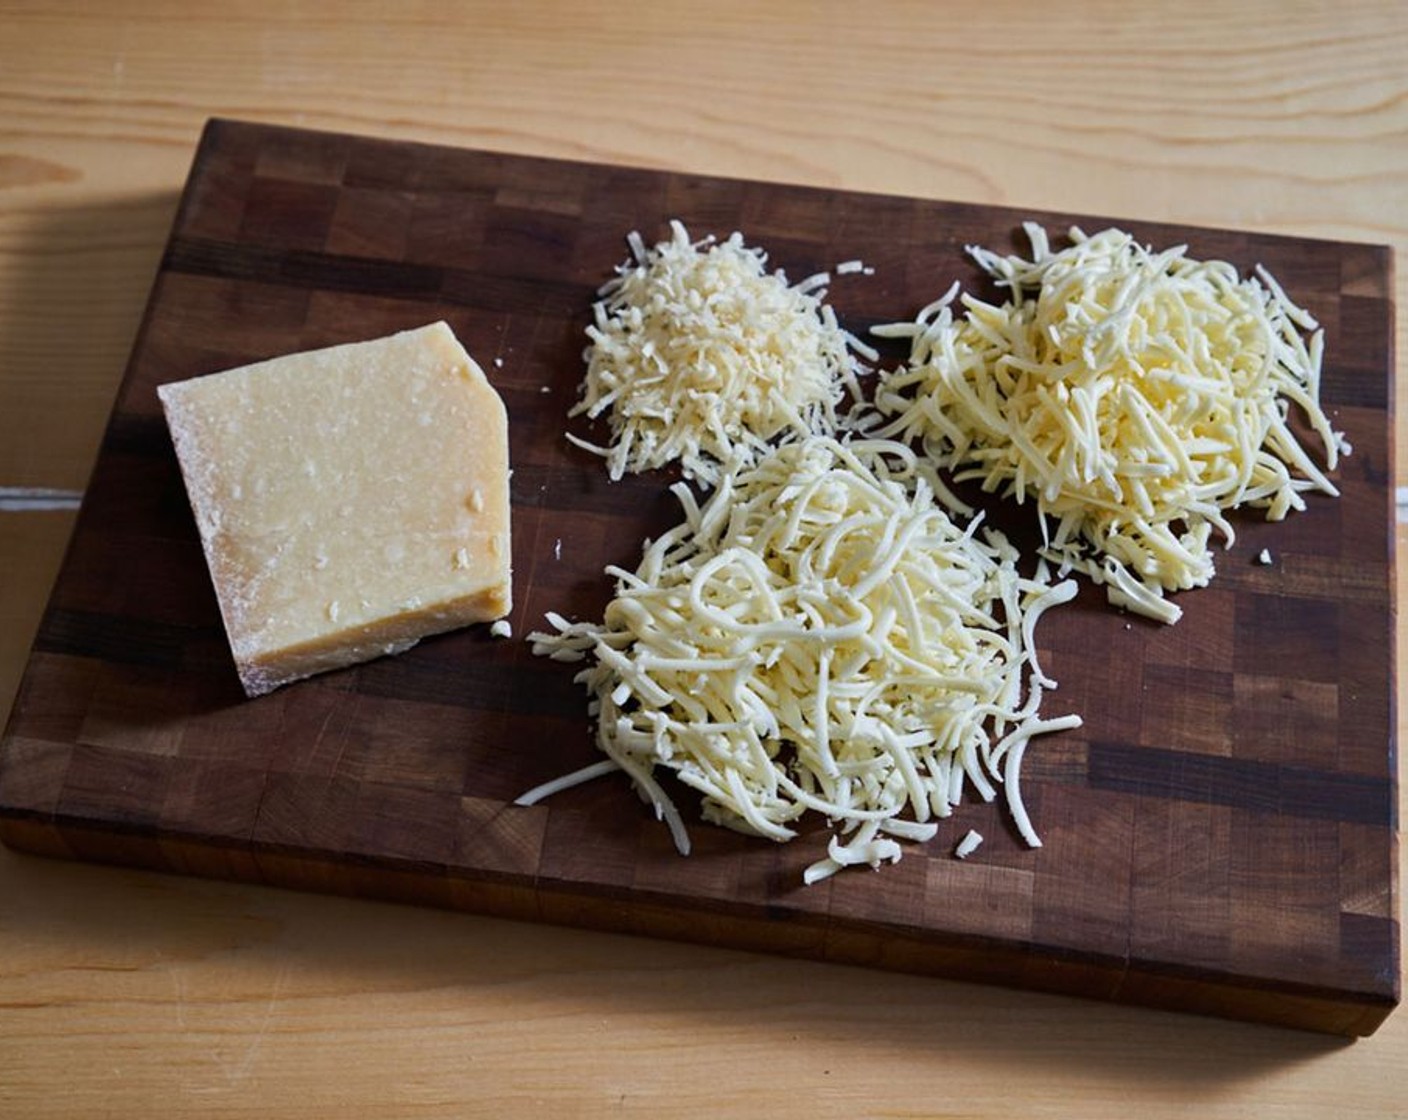 step 3 Mix together the Mozzarella Cheese (2 cups) and Fontina Cheese (1 1/2 cups). Keep the parmesan separate.